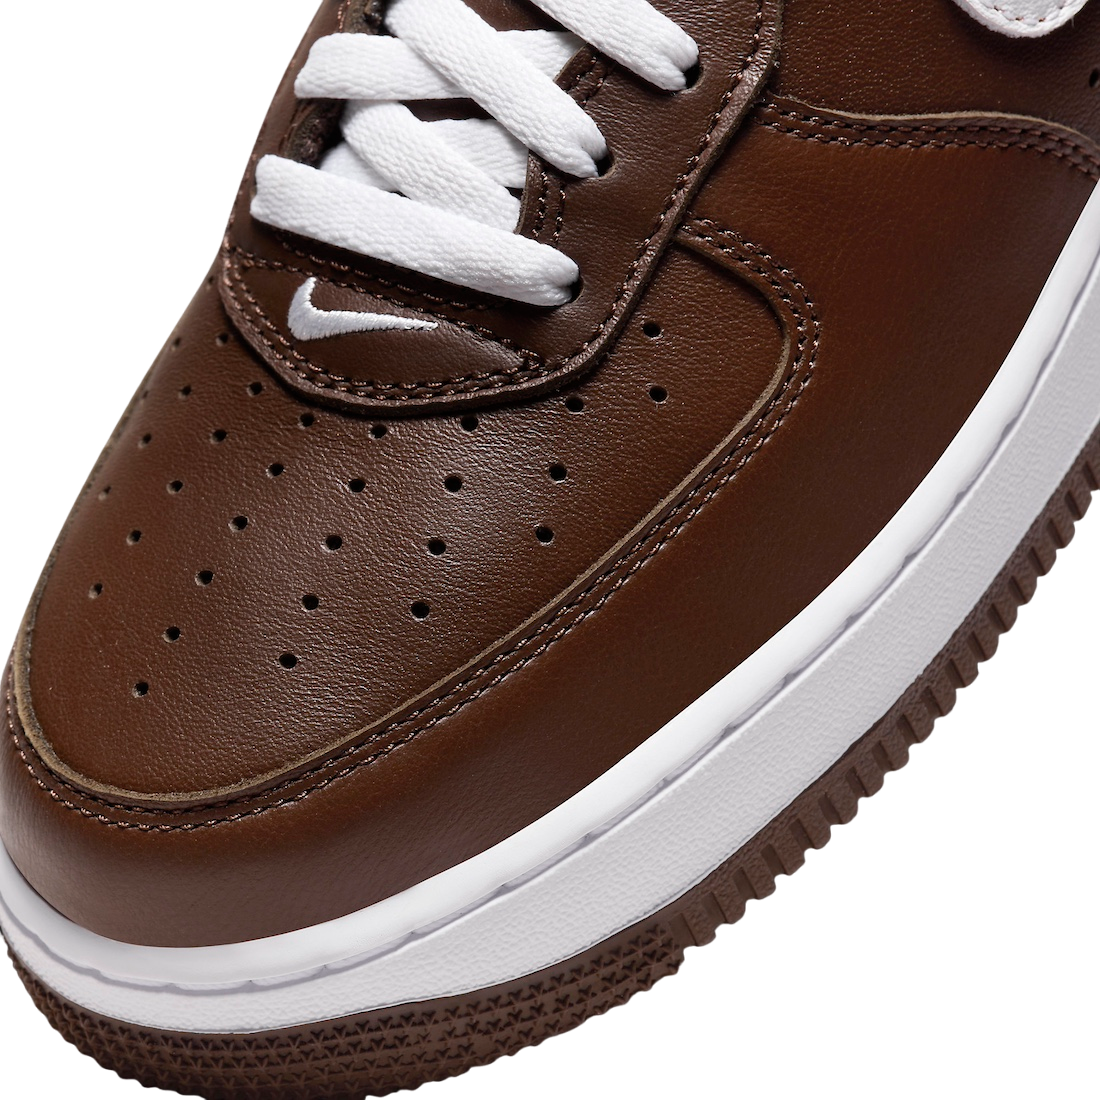 Nike Air Force 1 Low Chocolate FD7039-200